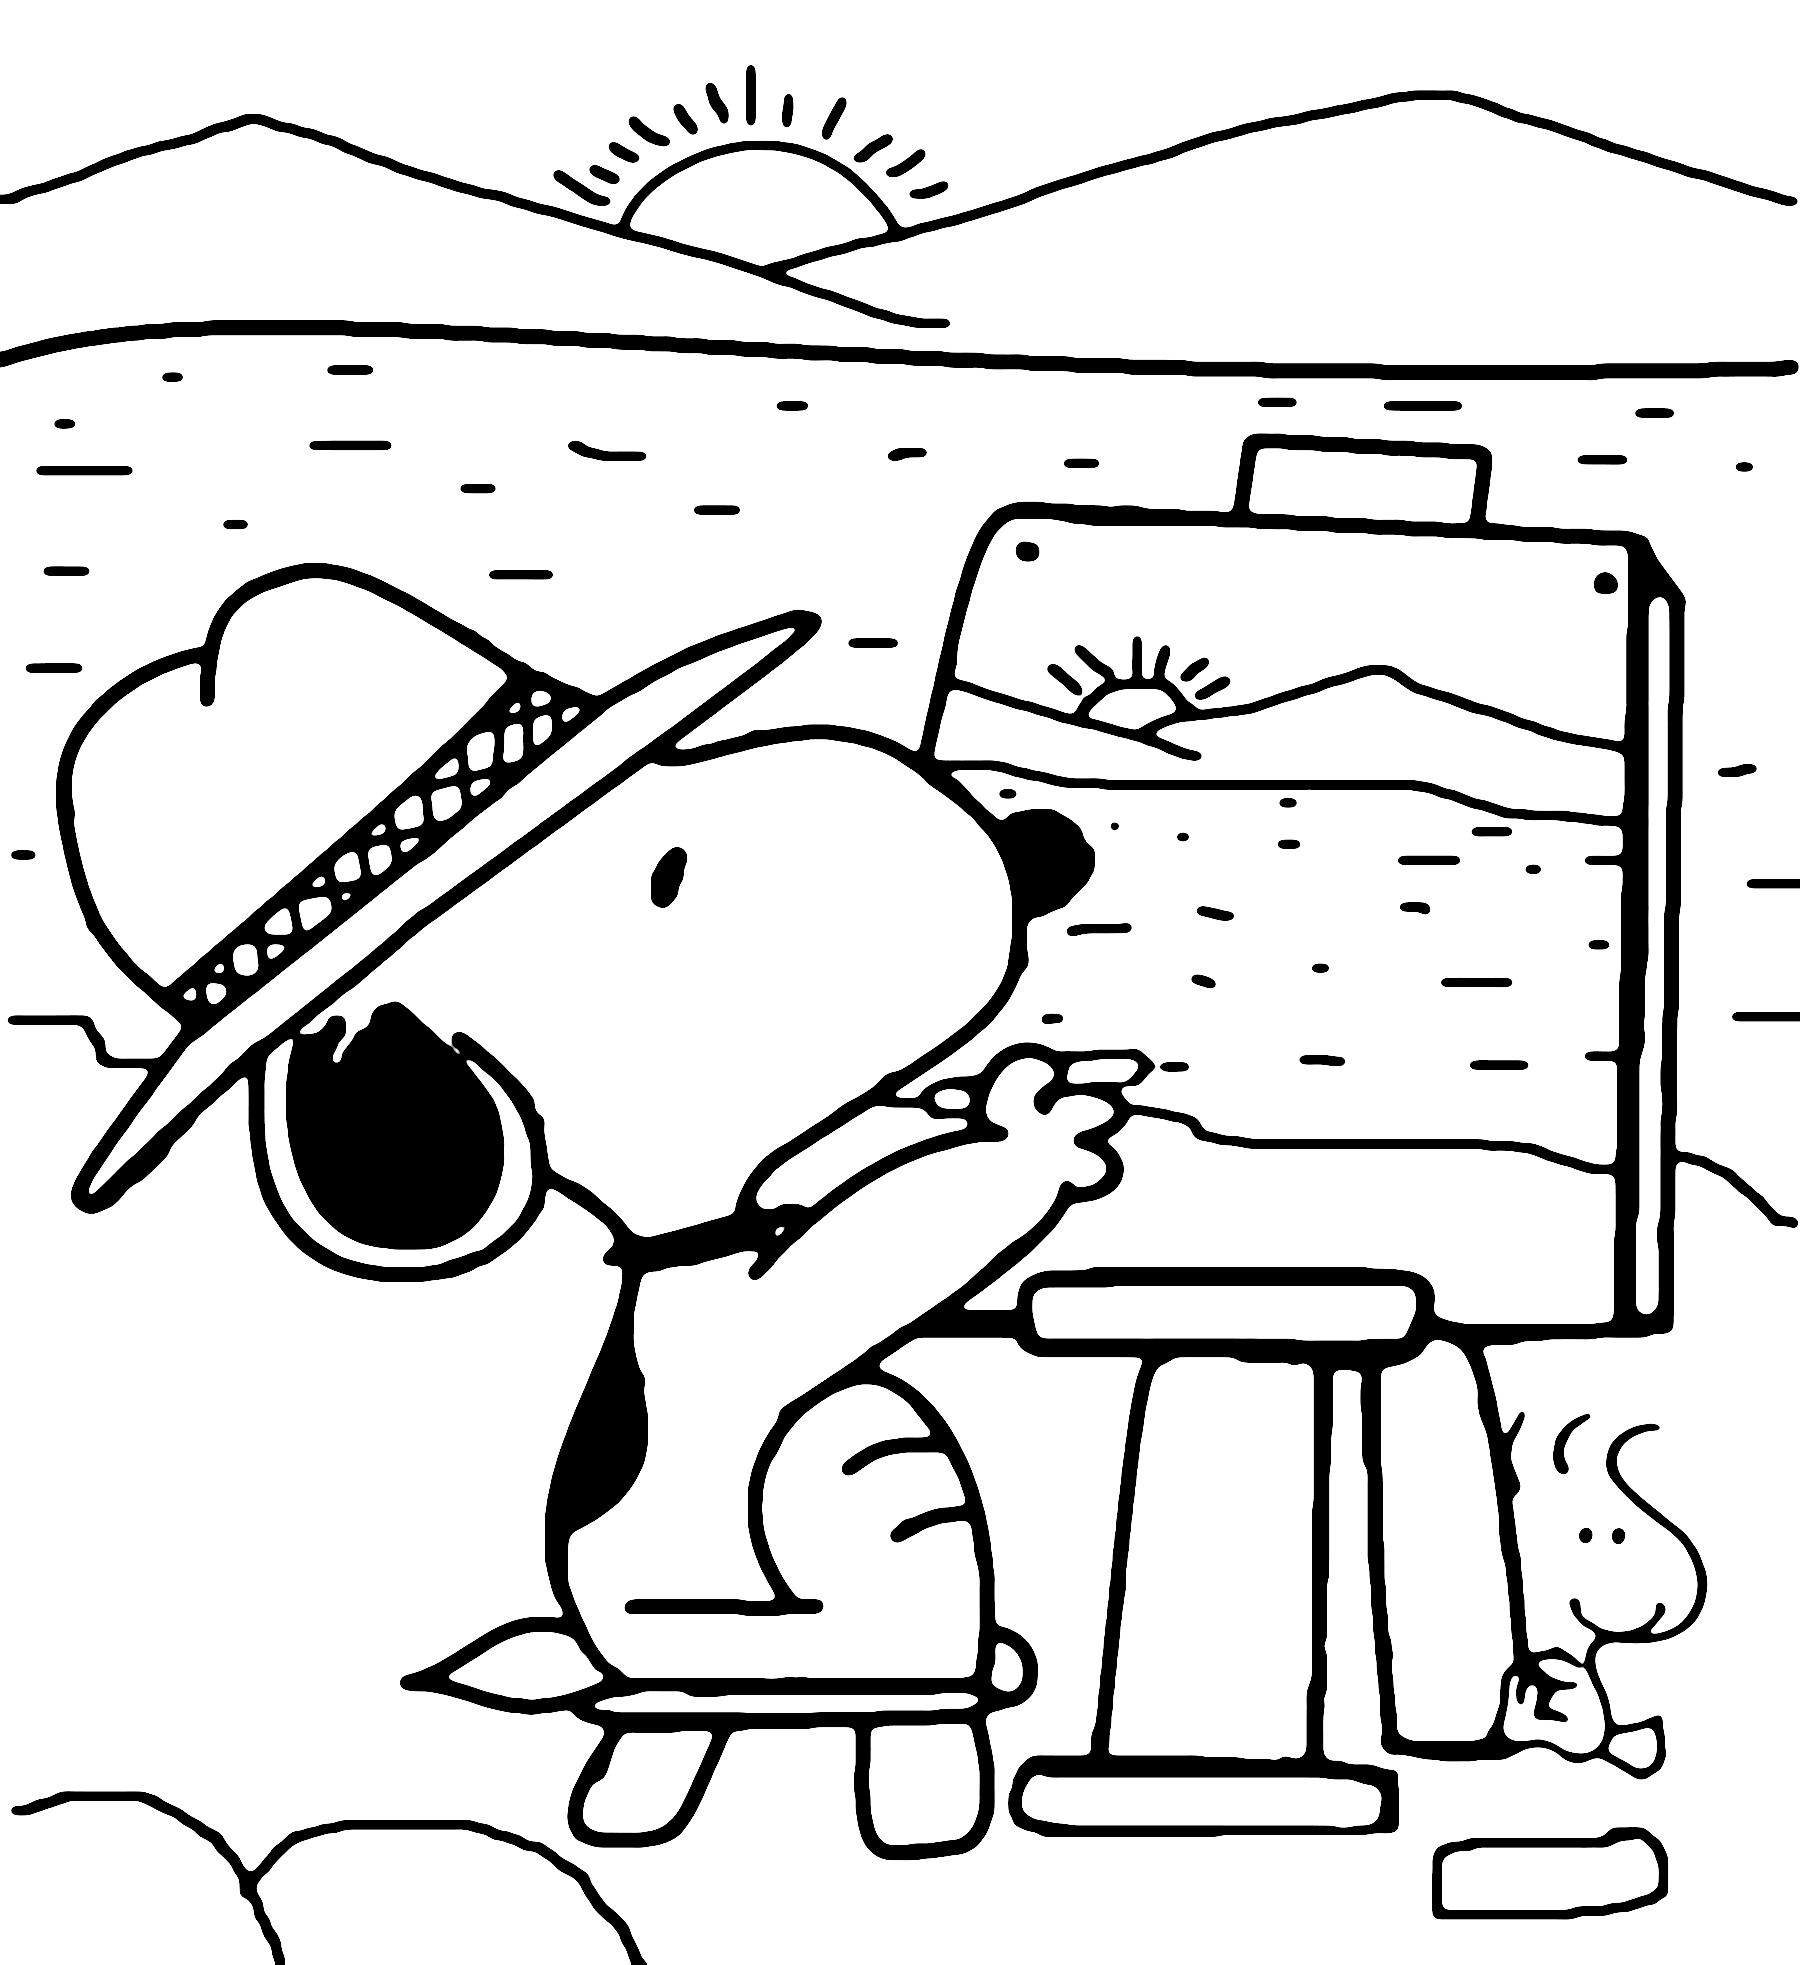 Snoopy Loves to Paint Nature Easy and Cute Coloring Page